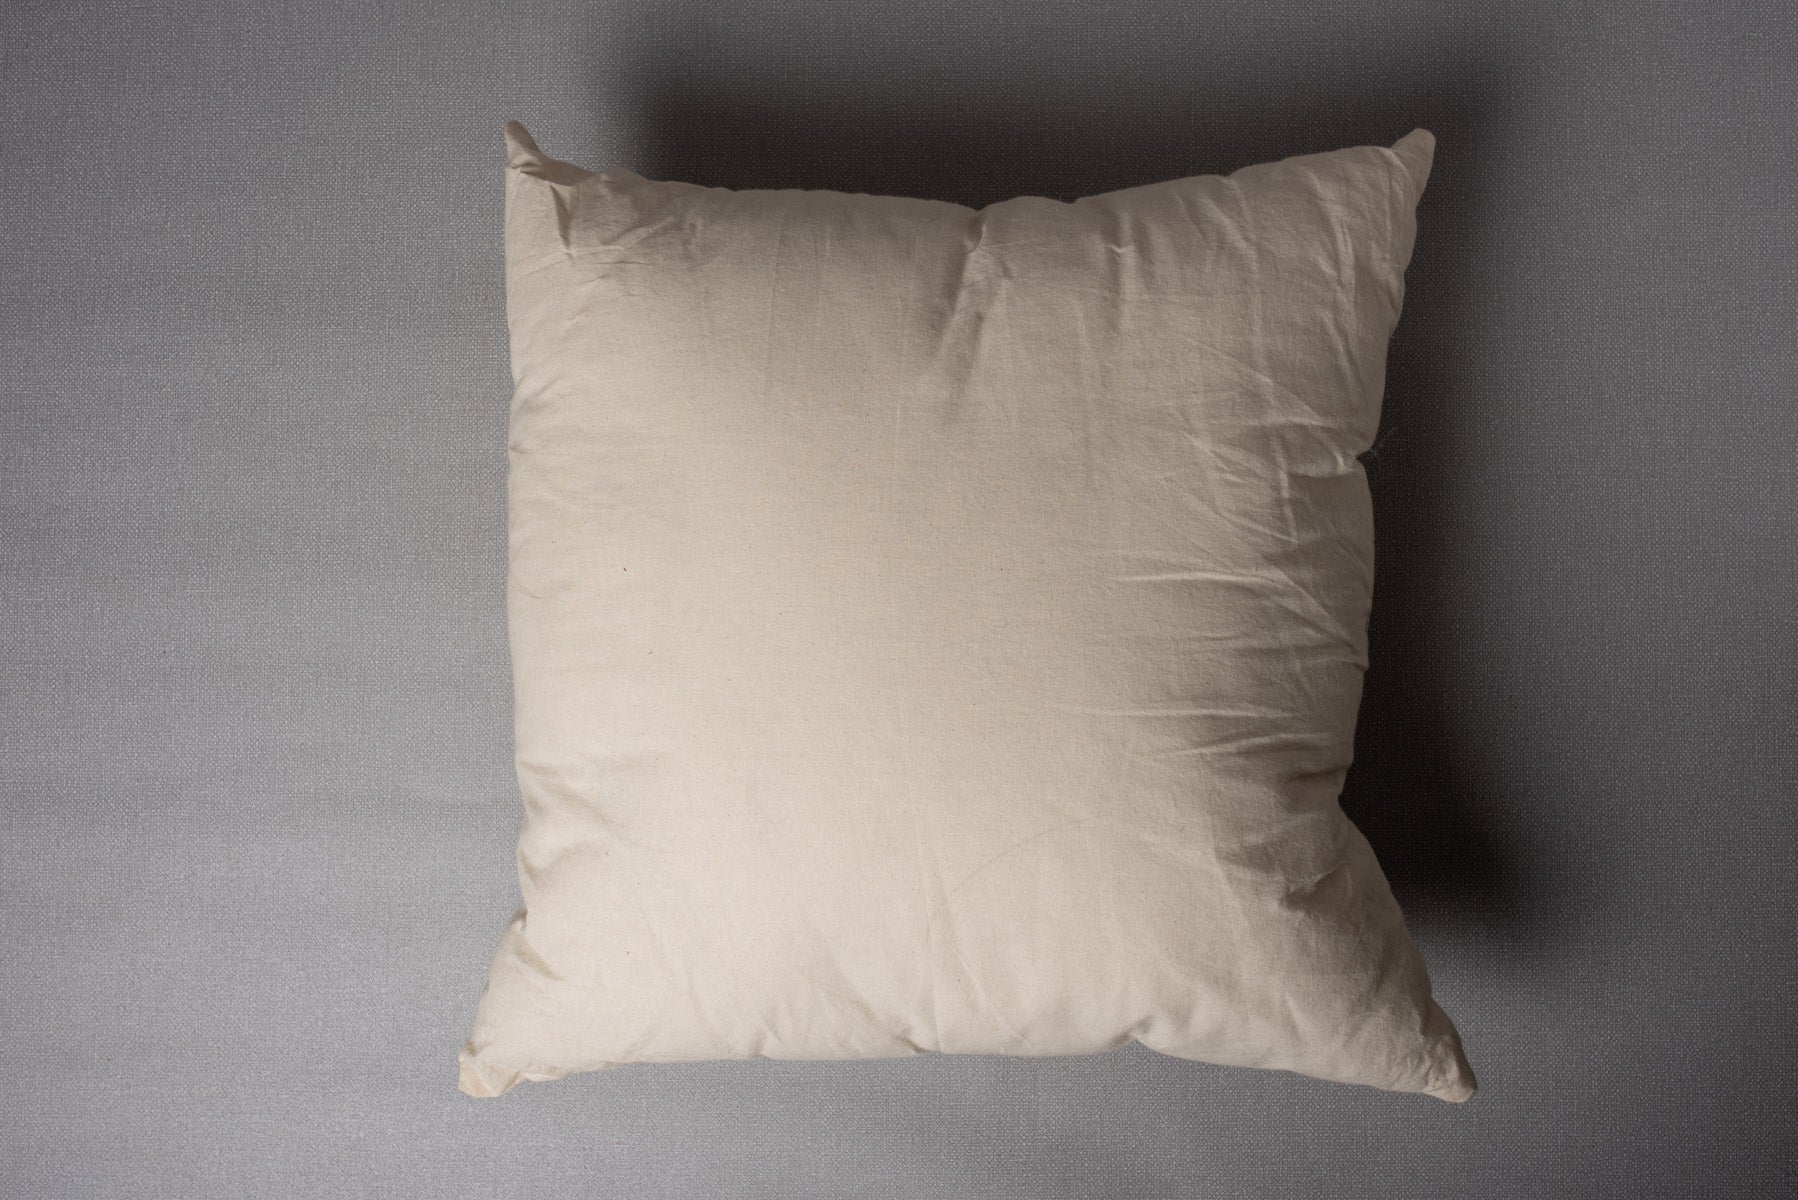 Cushion Filler with Man Made Fiber Filling and Cotton Cover - 24"